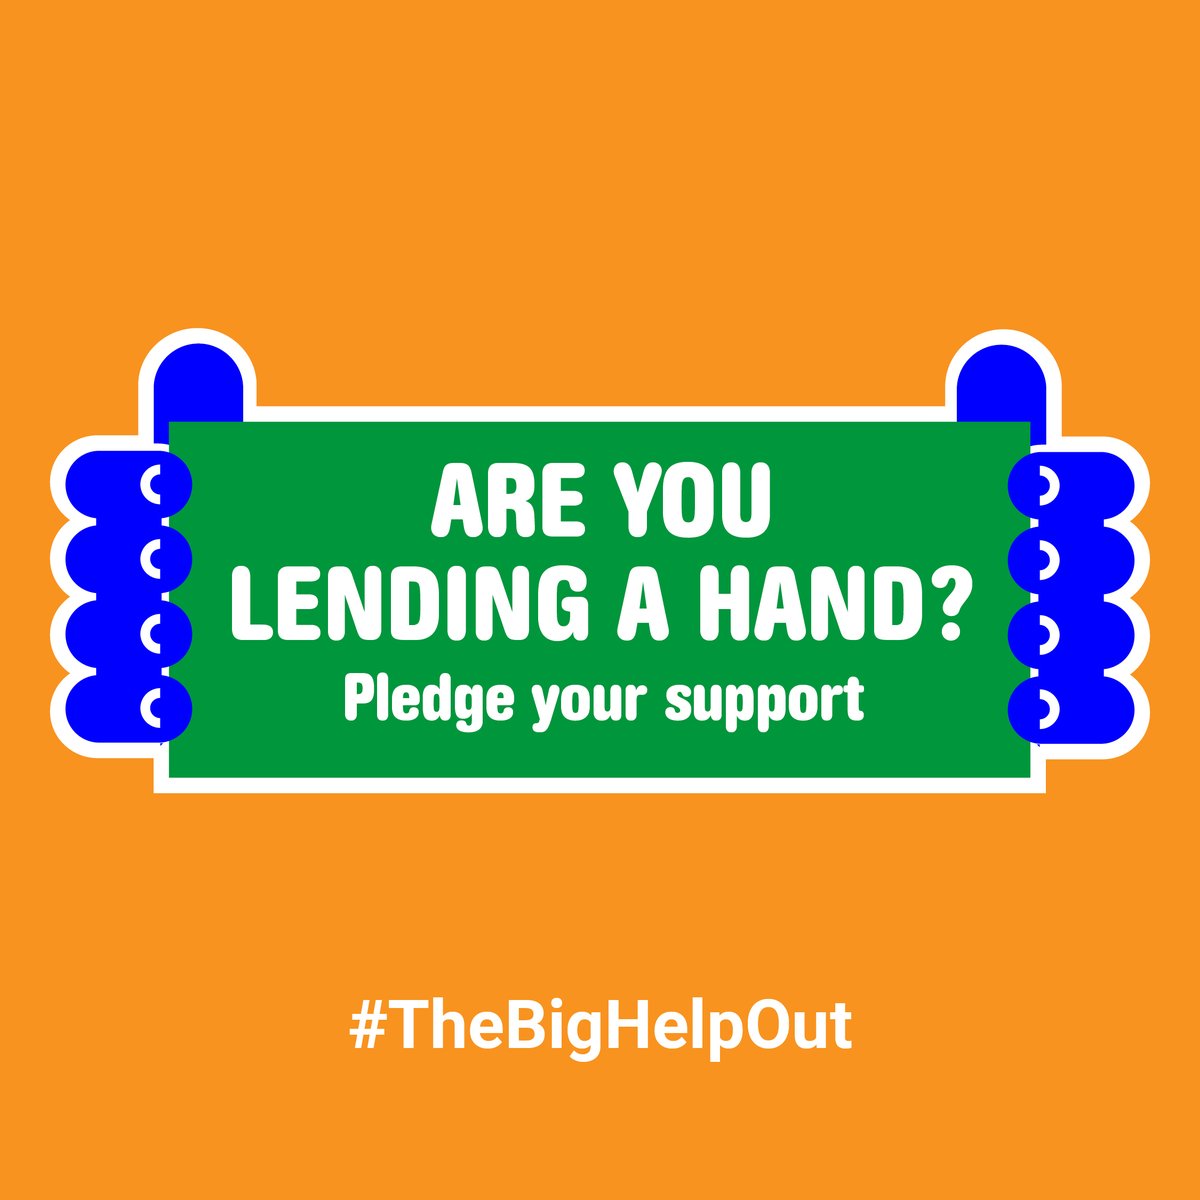 Did you know that you can find local charities and causes to #volunteer your time with @TheBigHelpOut24?

Even better, we're on there!

This summer, from June 7th-9th, you can #LendAHand through joining us during #VolunteersWeek 💫 

#TheBigHelpOut